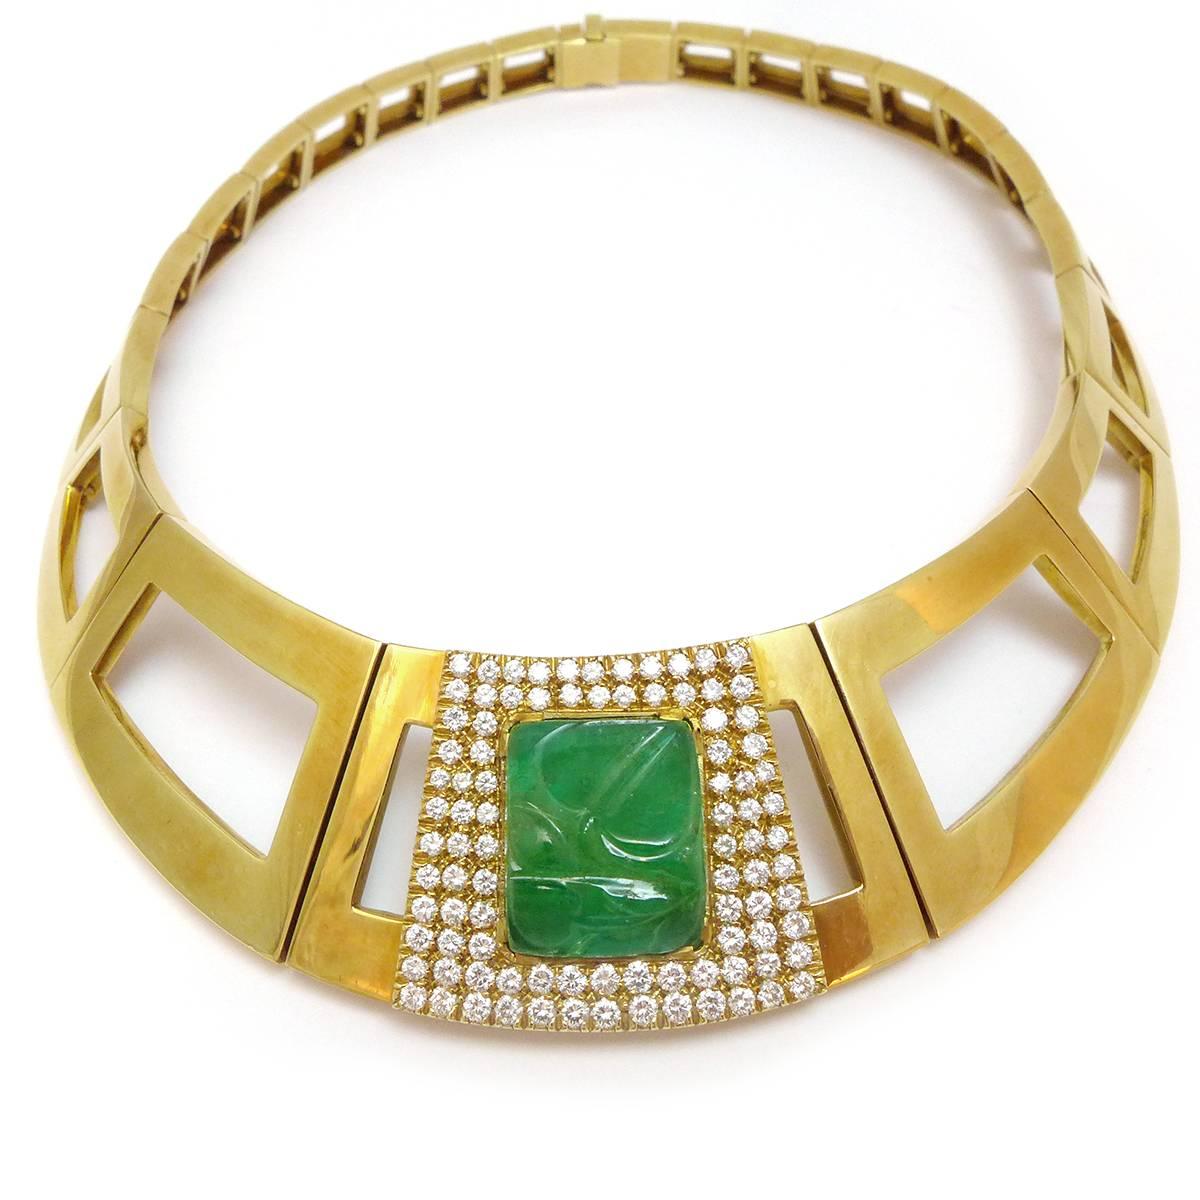 A 750°/00 yellow gold Repossi necklace with square links enhanced in the middle of the necklace with an engraved vegetal decoration emerald surrounding by diamonds.
Total diamond’s weight : about 4 carats.
Link’s width : 30 mm.
Inside dimensions